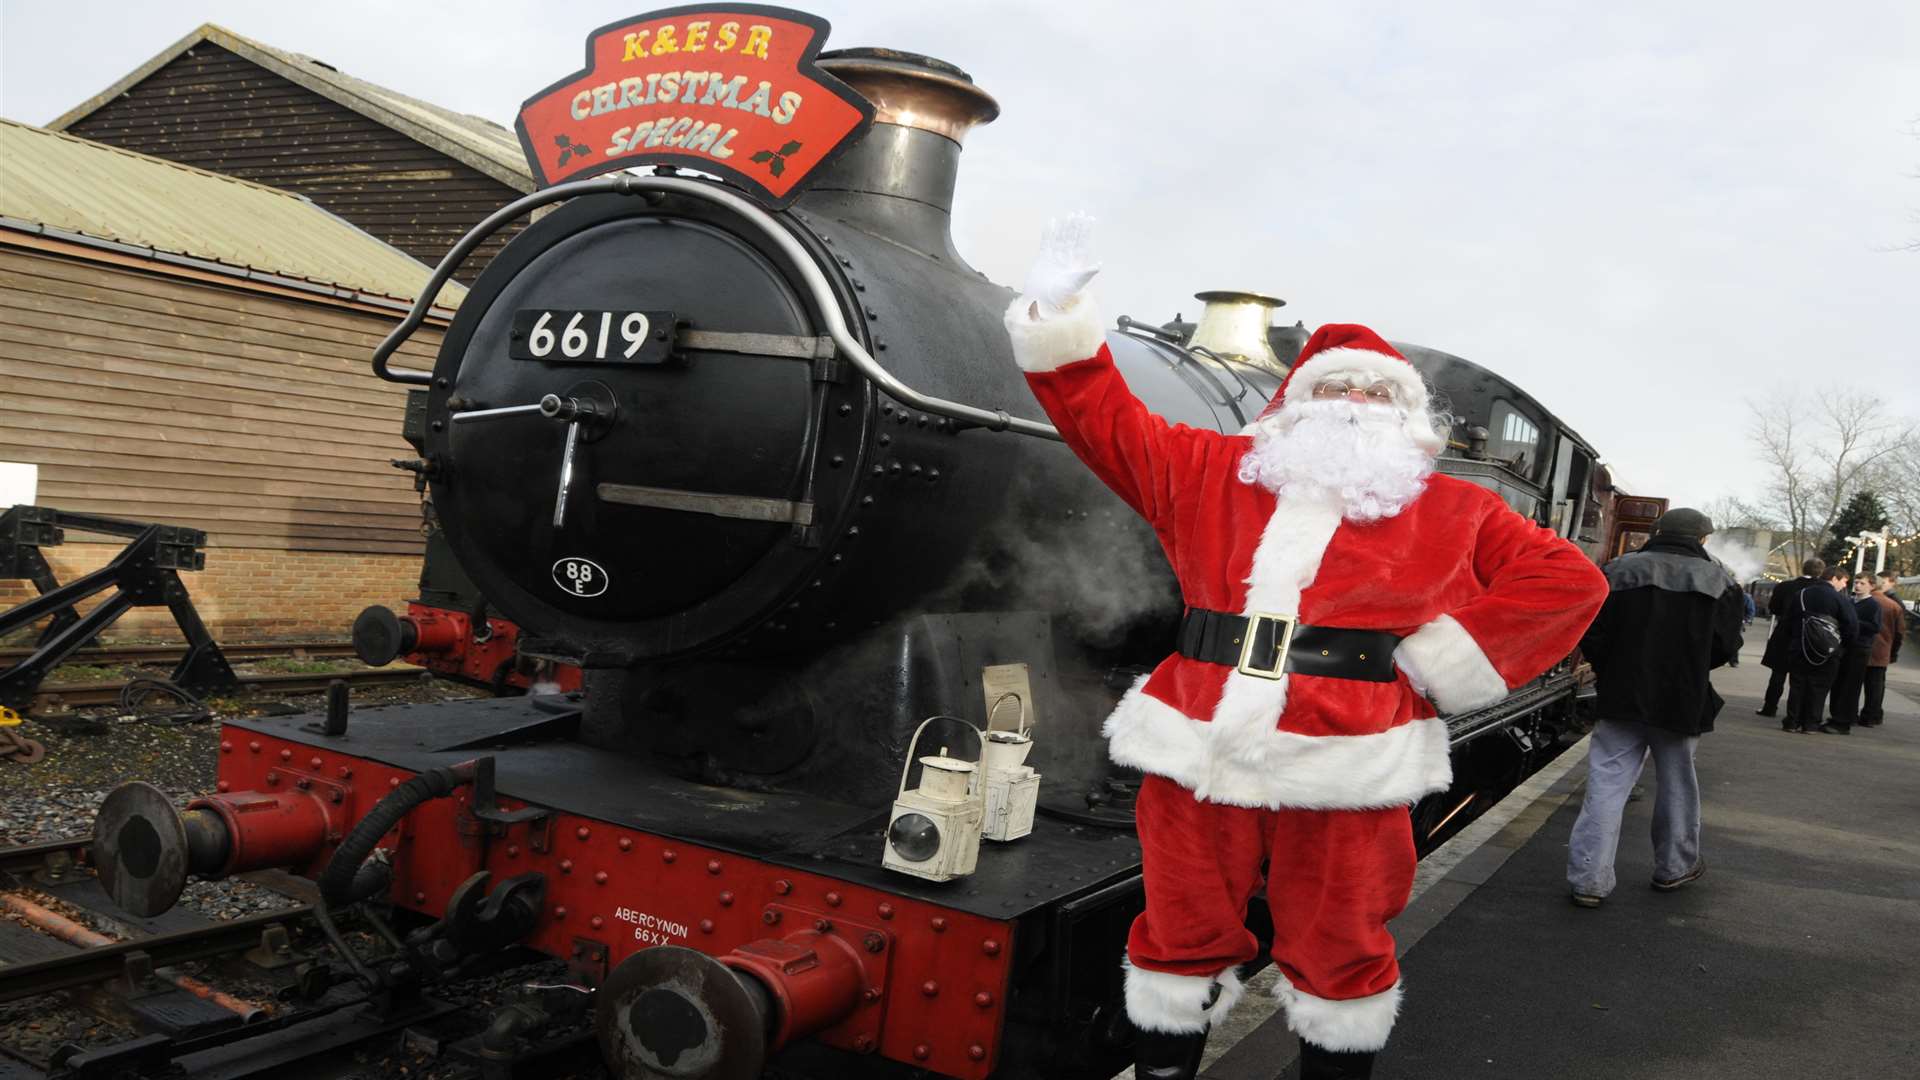 Father Christmas is waiting to meet you at Tenterden station